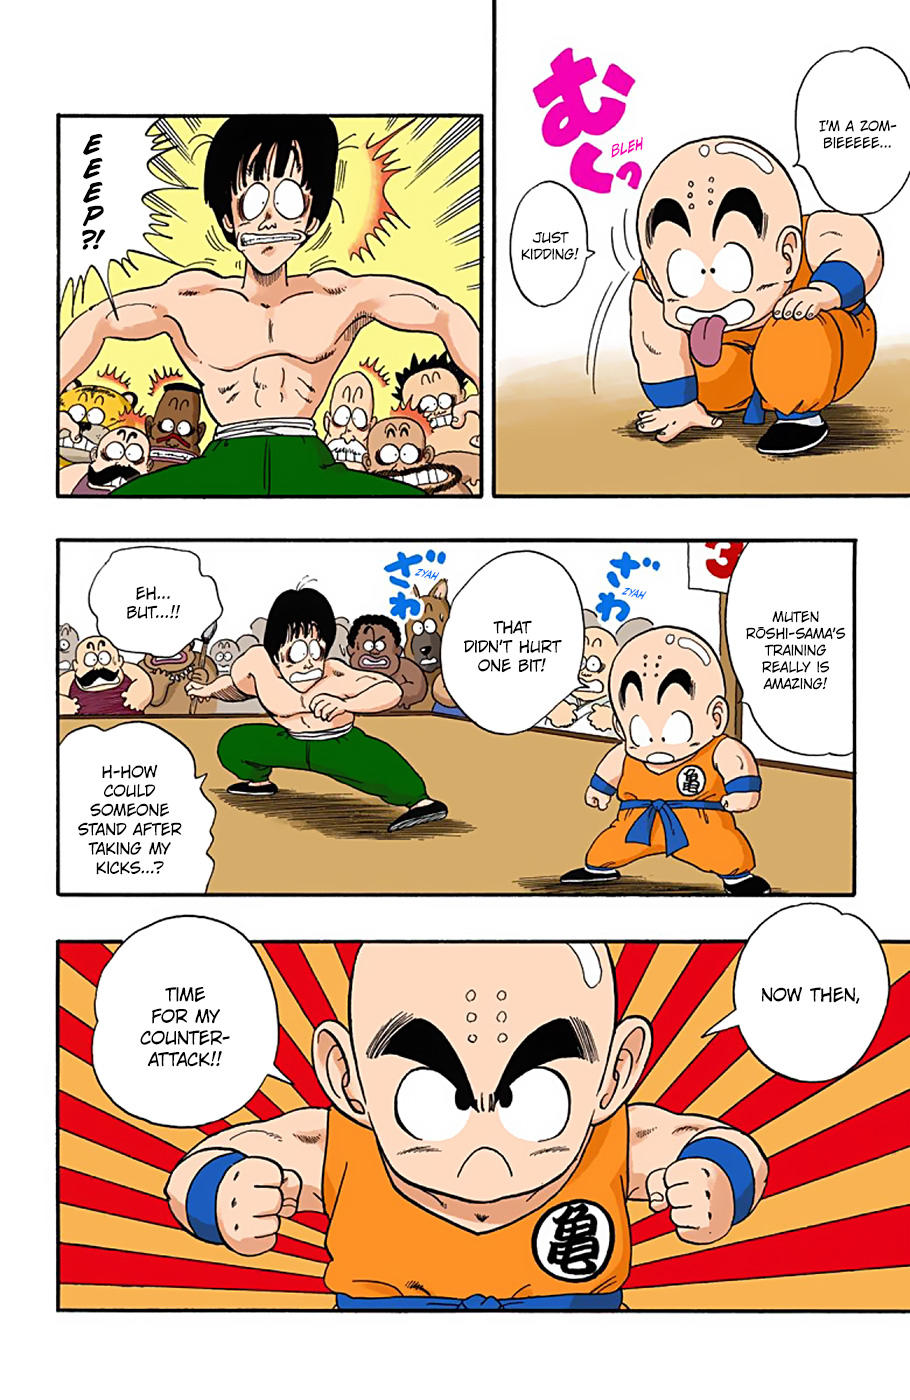 Dragon Ball - Full Color Edition Vol.3 Chapter 34: Unrivaled Under The Heavens!! page 6 - Mangakakalot